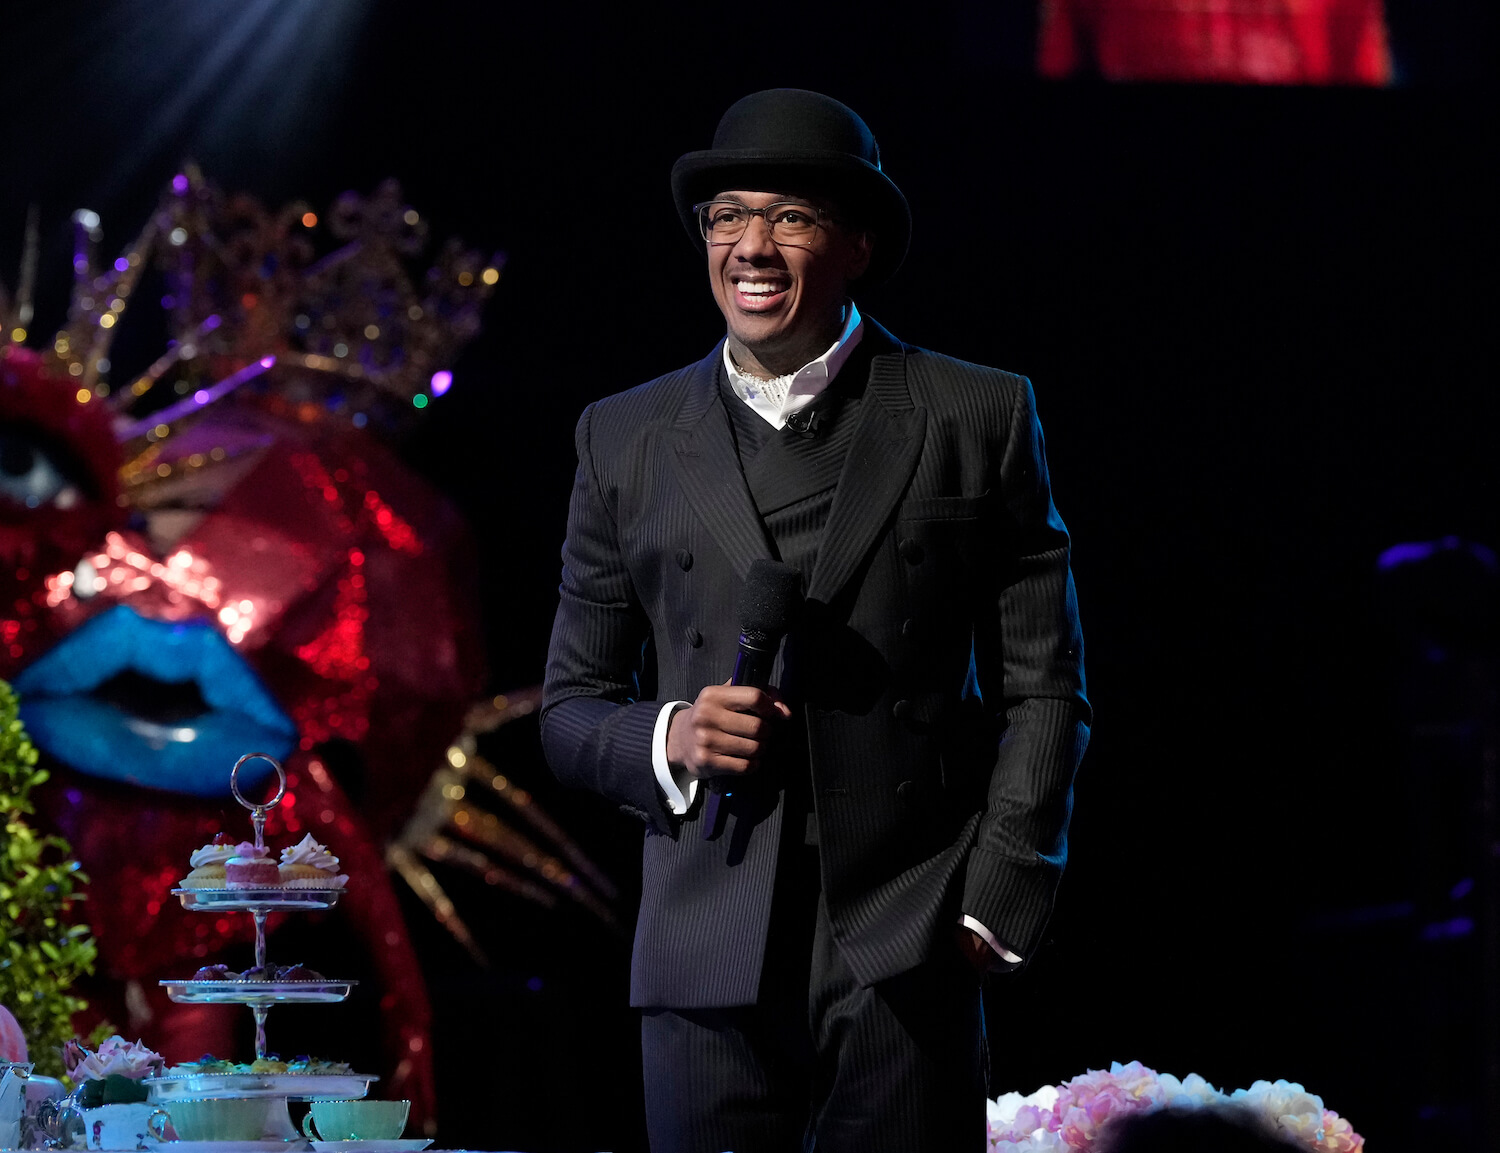 Nick Cannon, the host of 'The Masked Singer' Season 10, wearing all black on stage